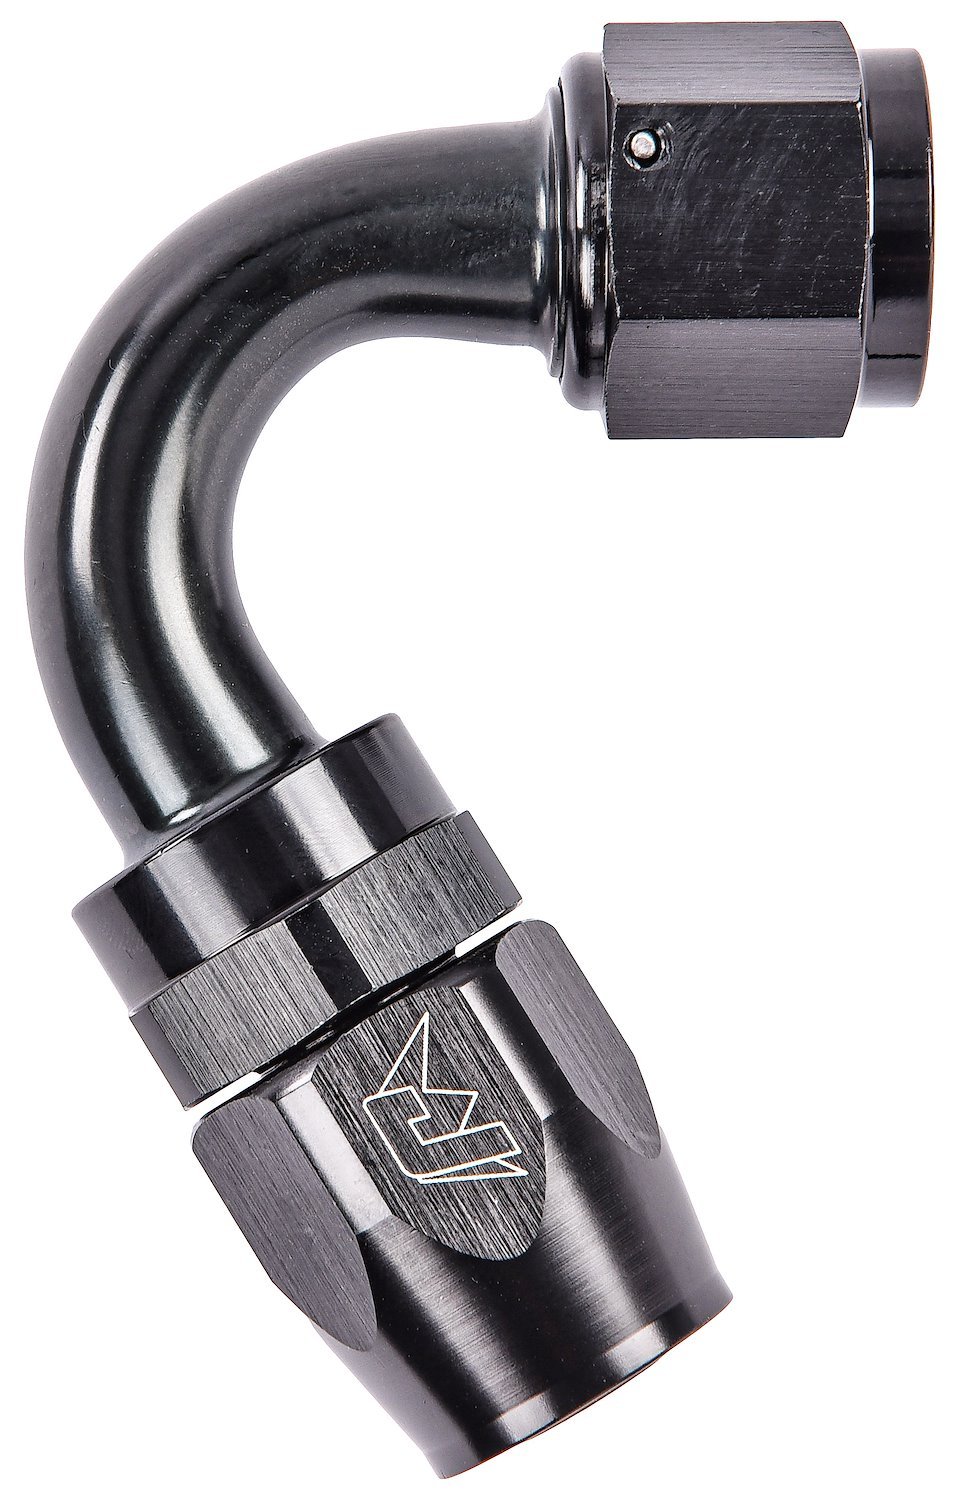 AN 120-Degree Max Flow Swivel Hose End [-10